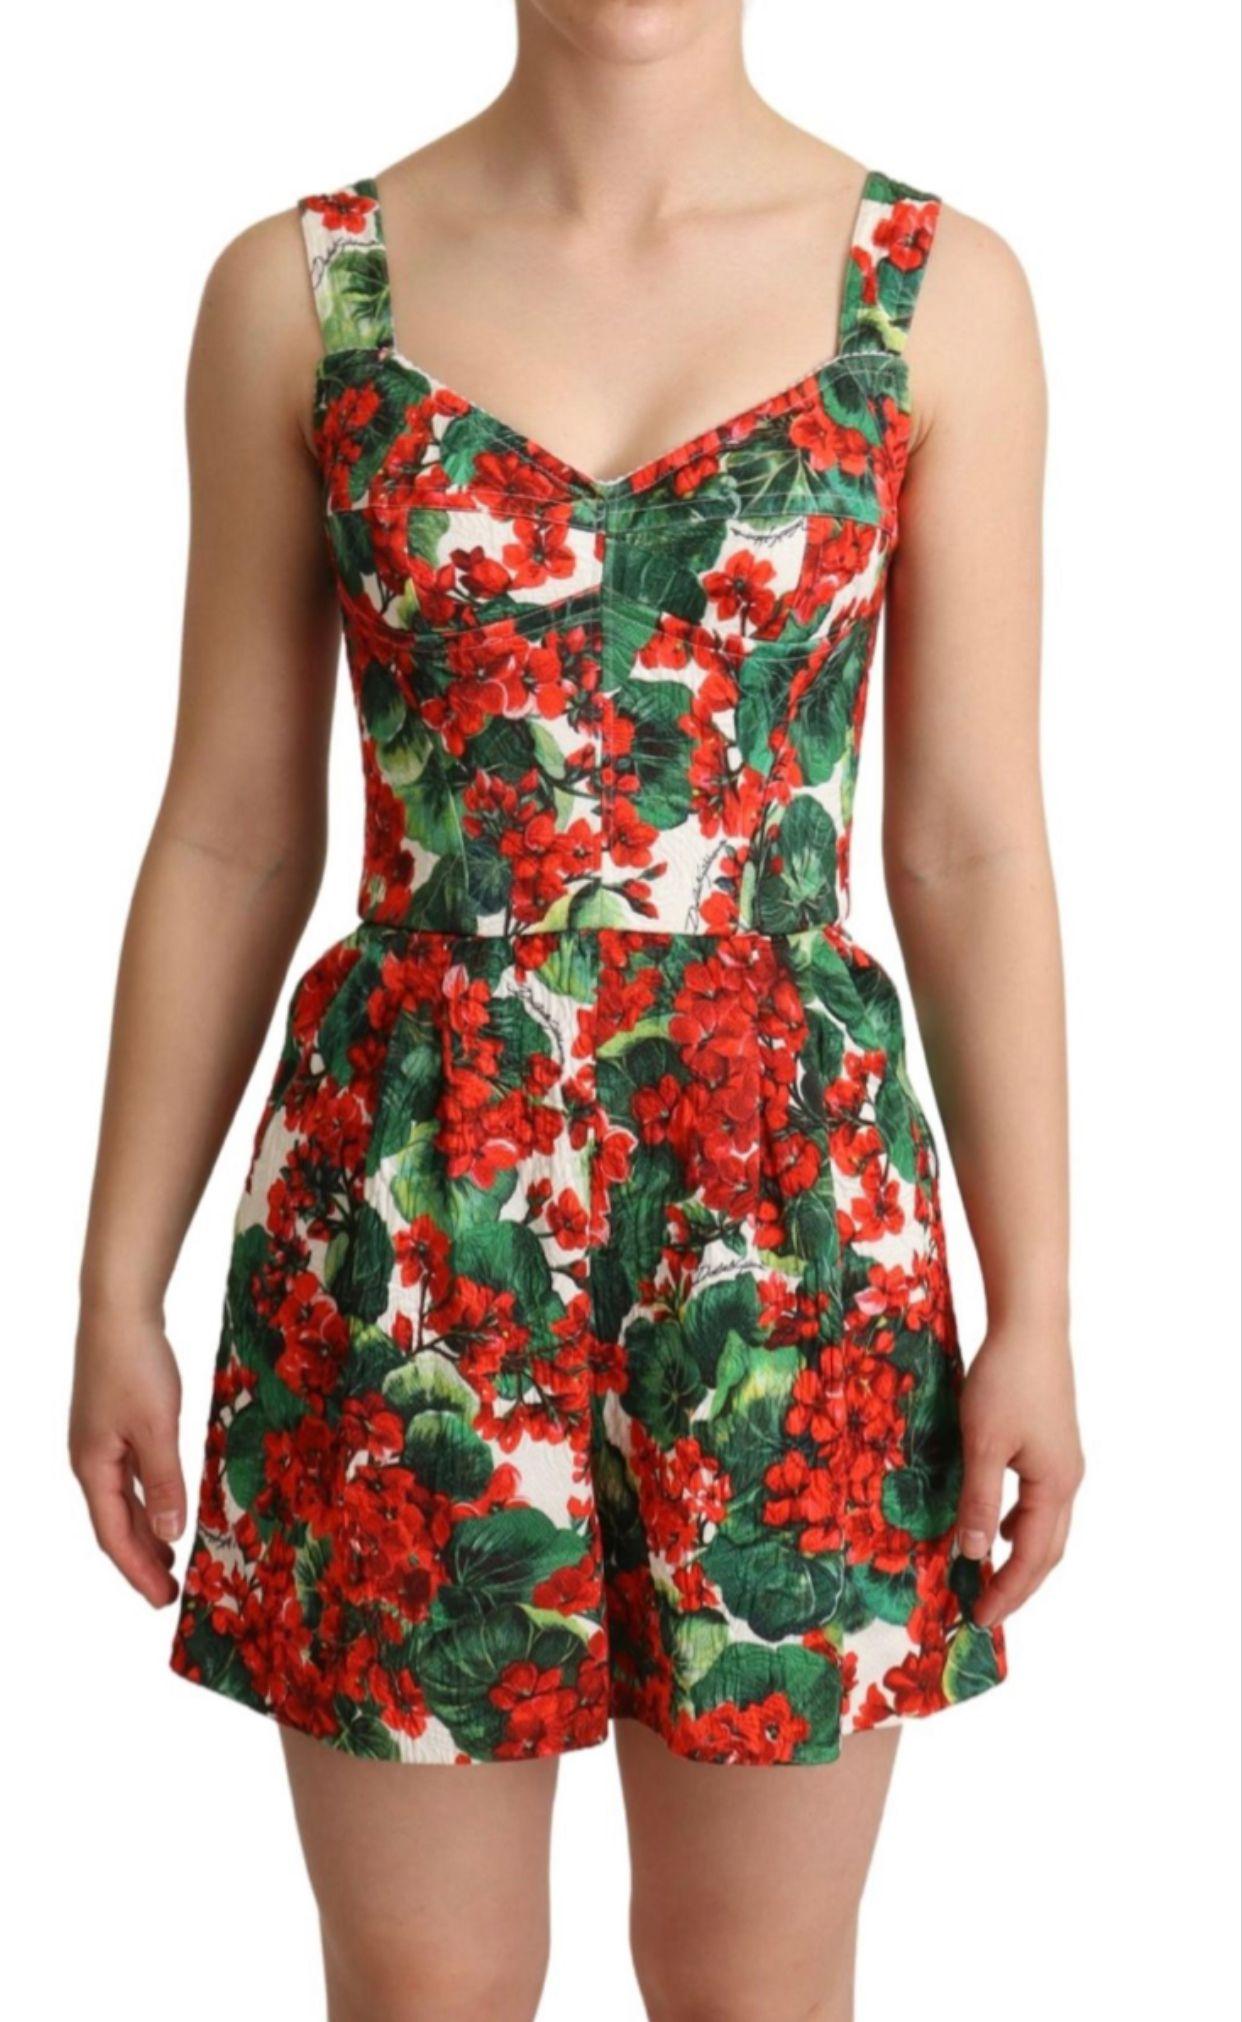 Dolce & Gabbana Red Geranium

printed combo top and shorts jumpsuit

Size 40IT - UK8 - S.

Cotton/Viscose/Polyamide

Brand new with tags.

Please check my other DG clothing &

accessories!